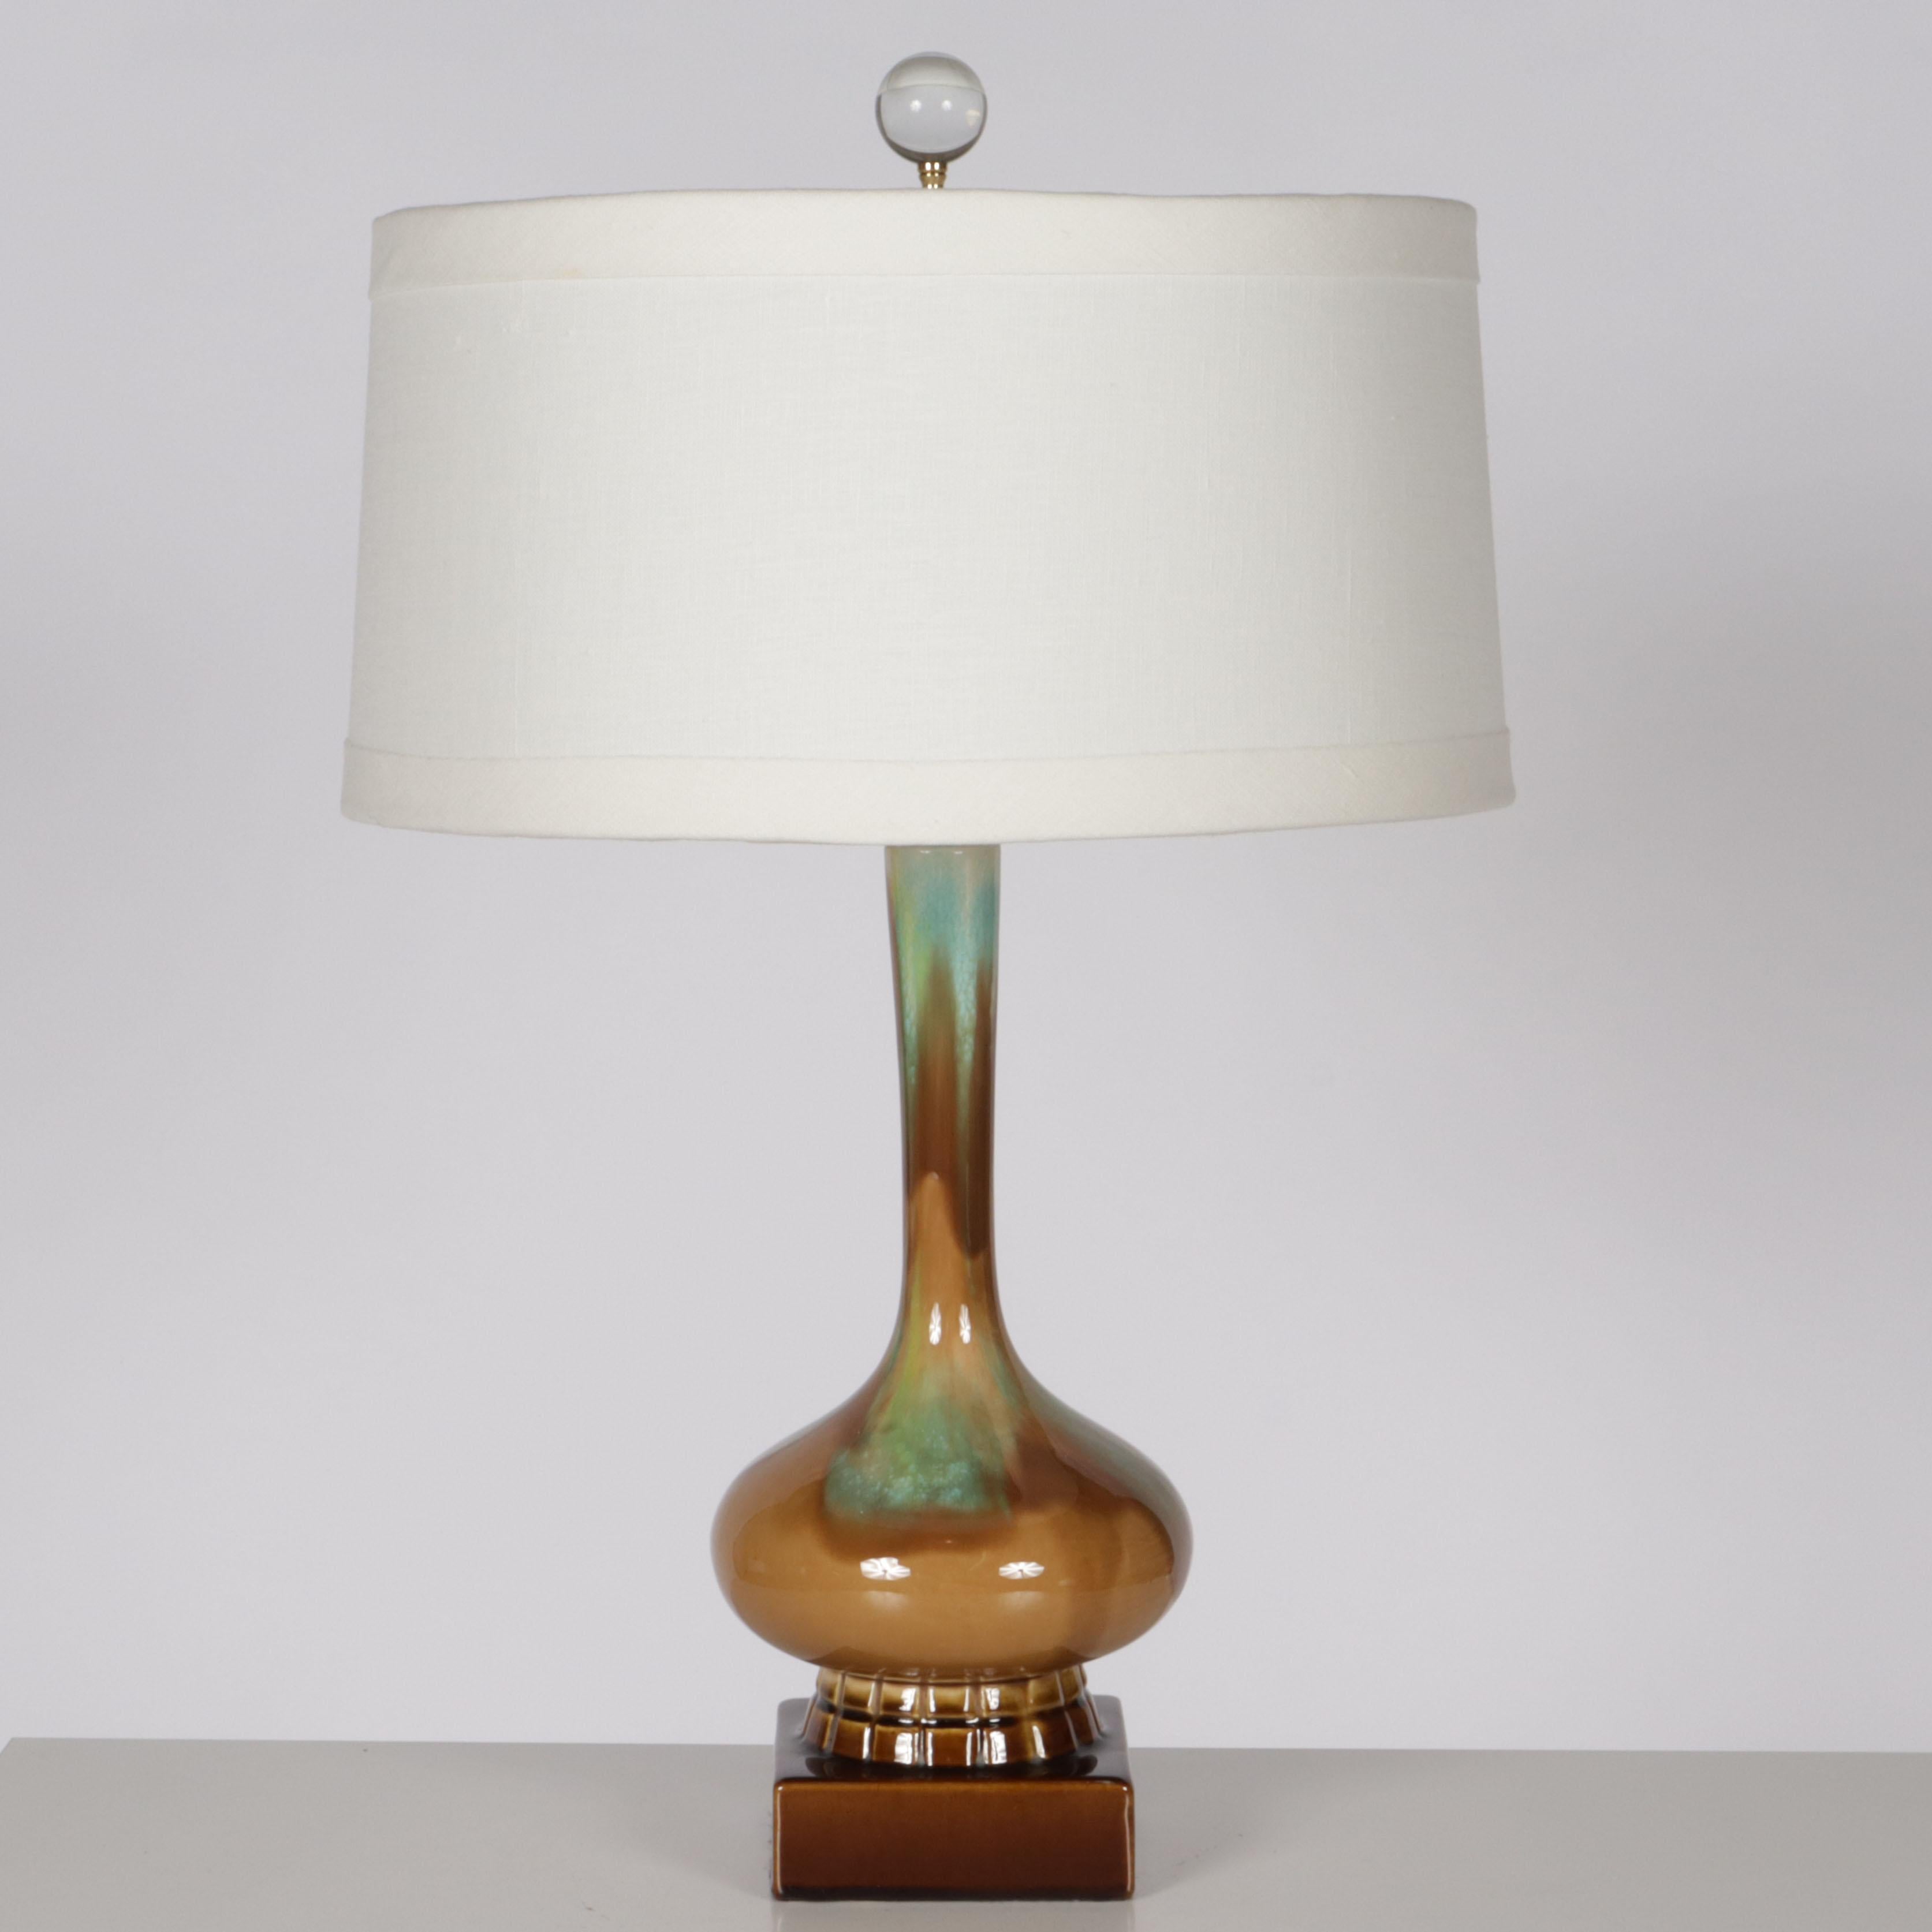 Turquoise, brown, and green ceramic lamp, c. 1960.